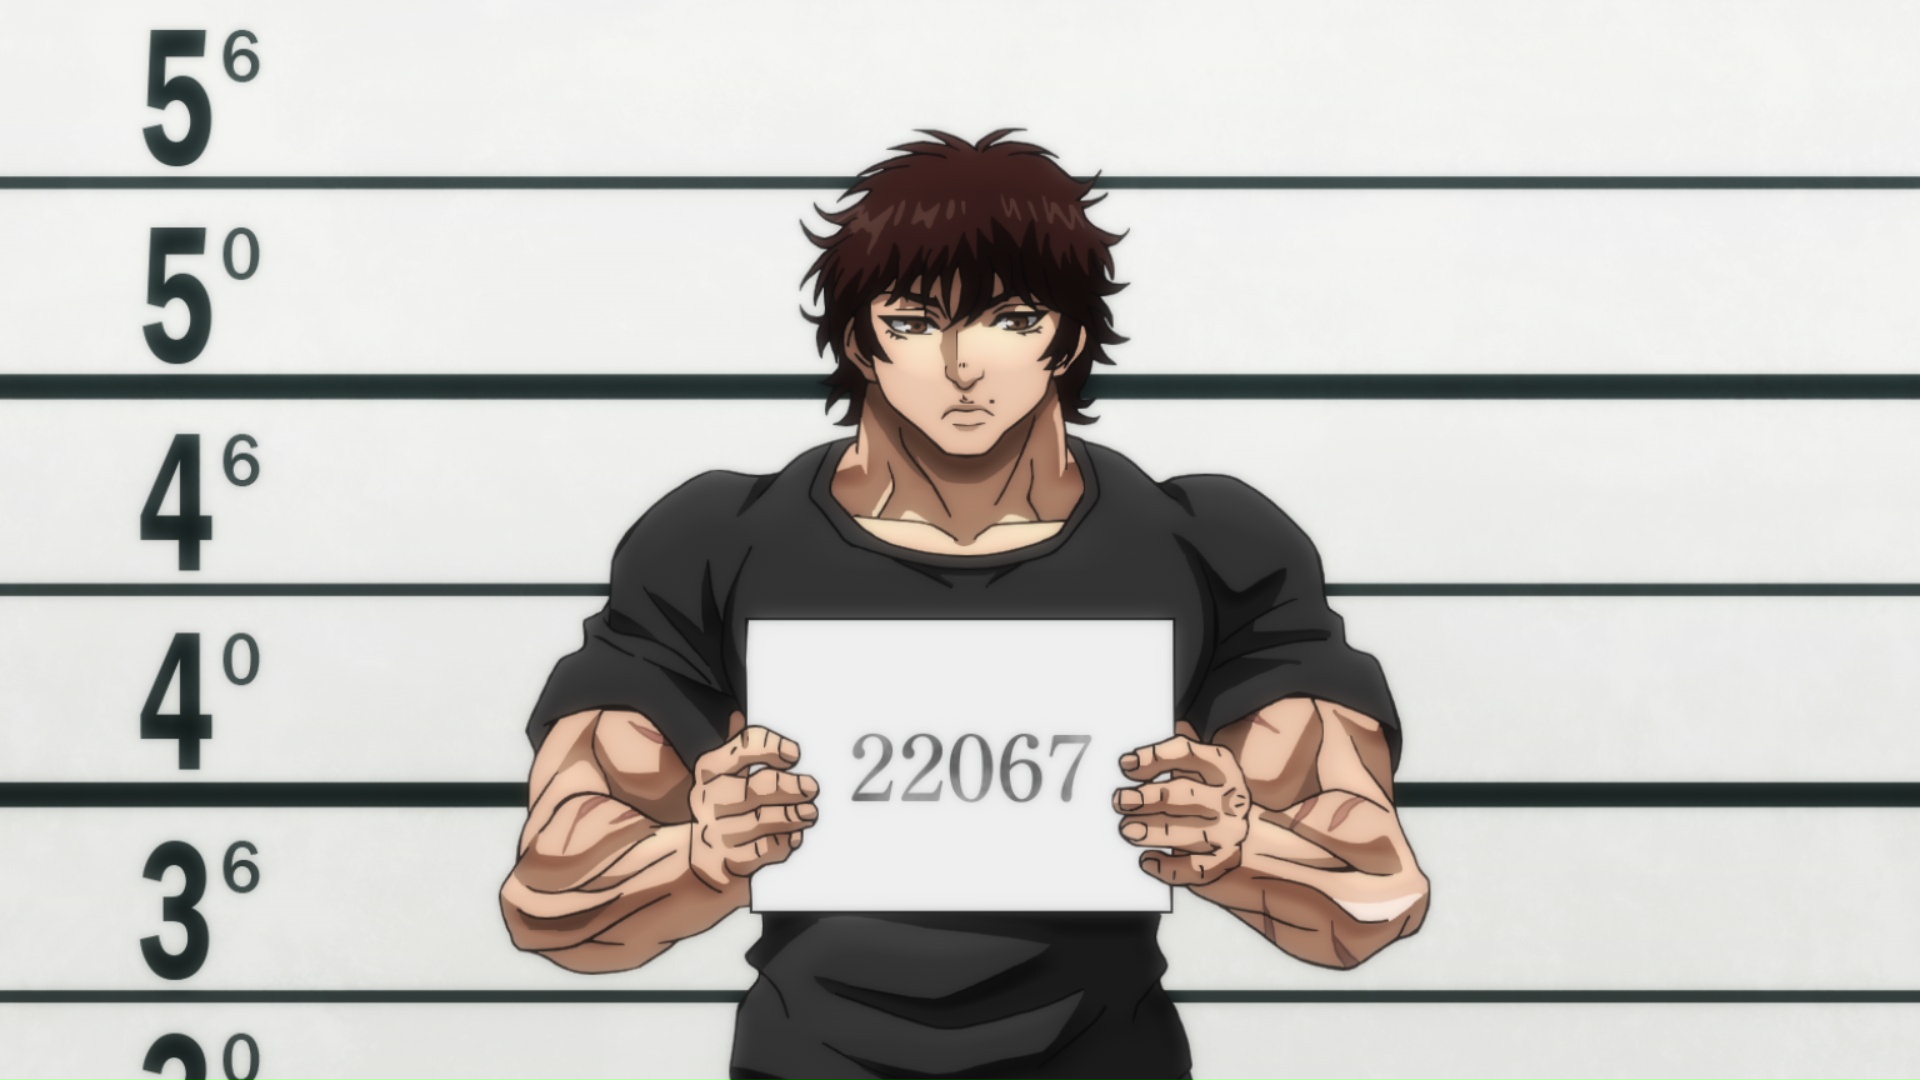 Baki poses for a mug shot after kidnapping a certain extremely prominent politician in a scene from the Baki Netflix Original Anime.